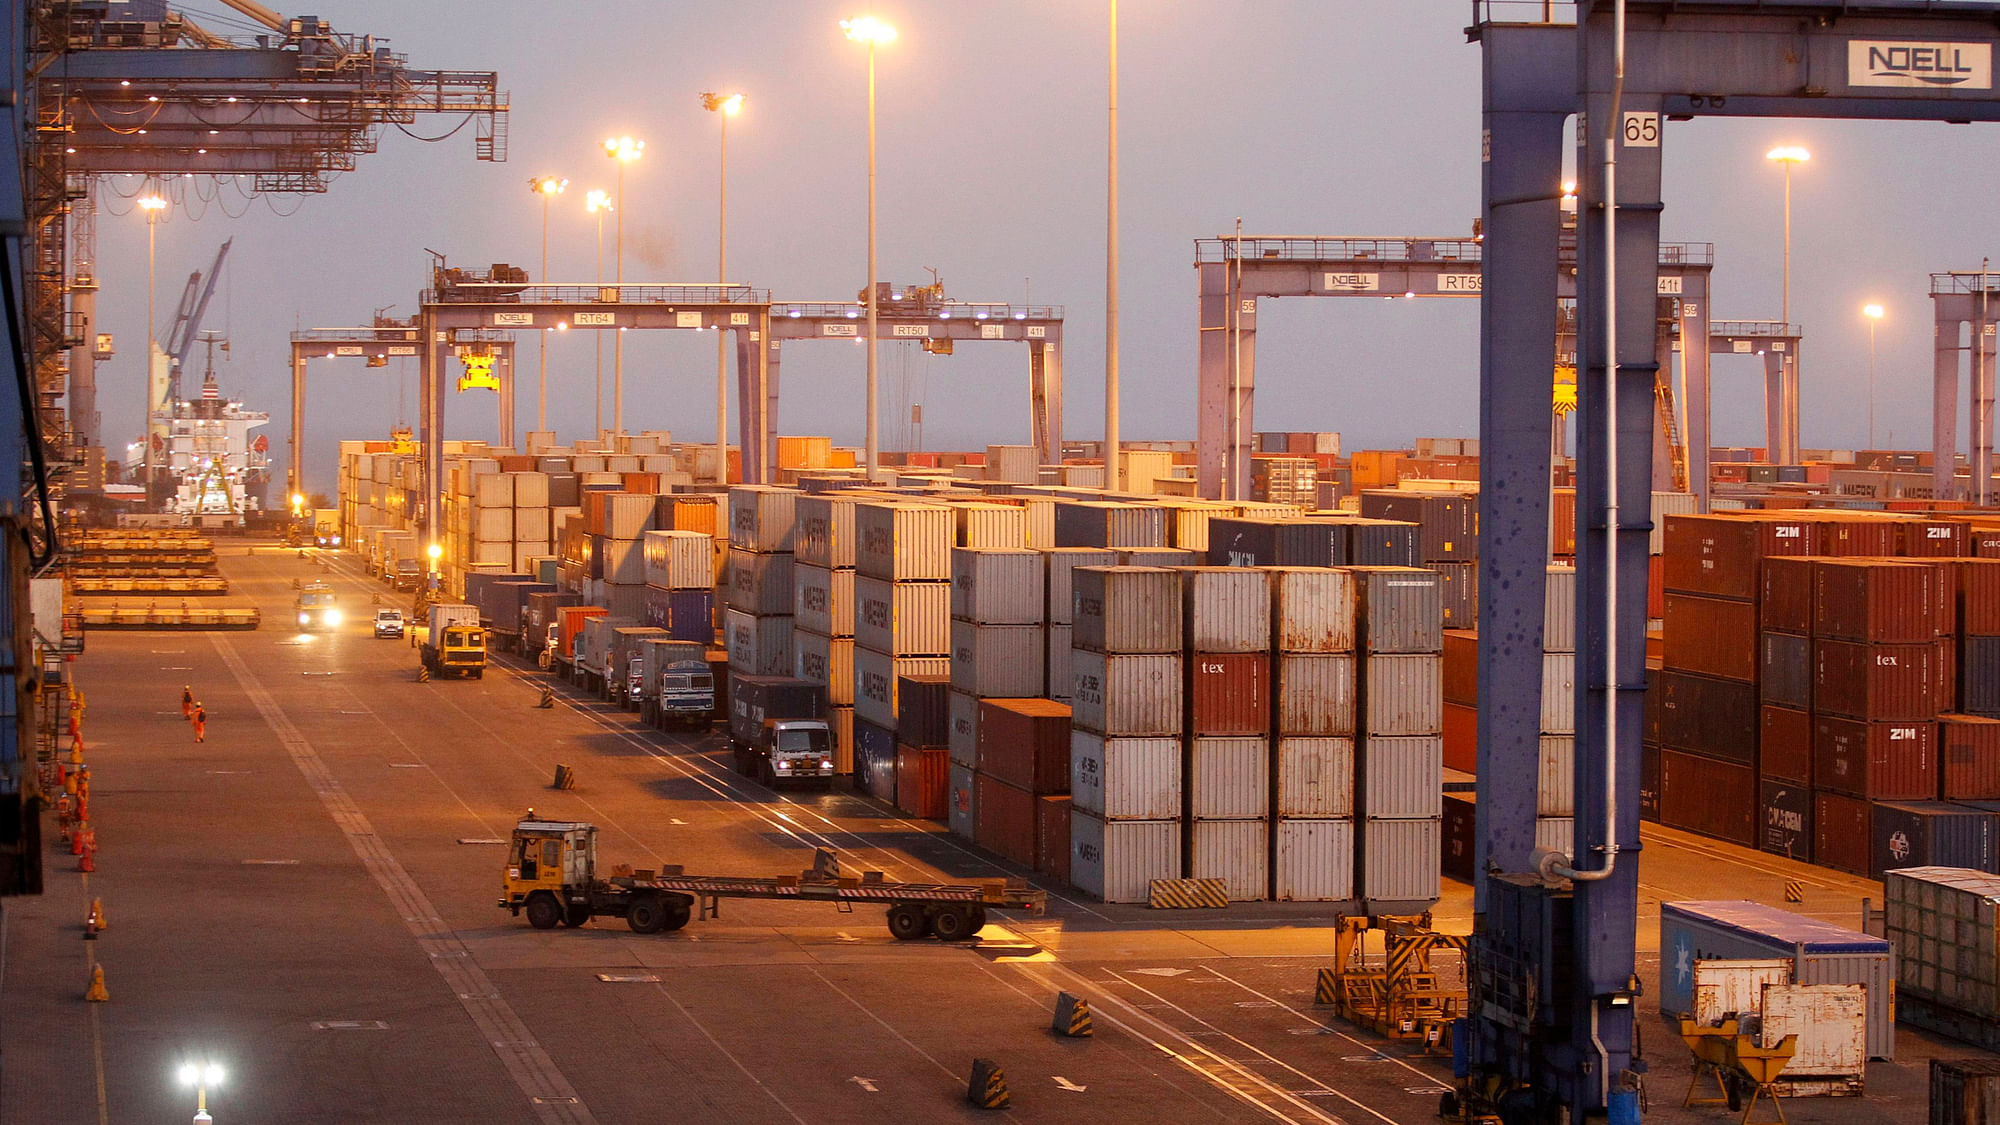 A general view of a container terminal is seen at Mundra Port in the western Indian state of Gujarat.